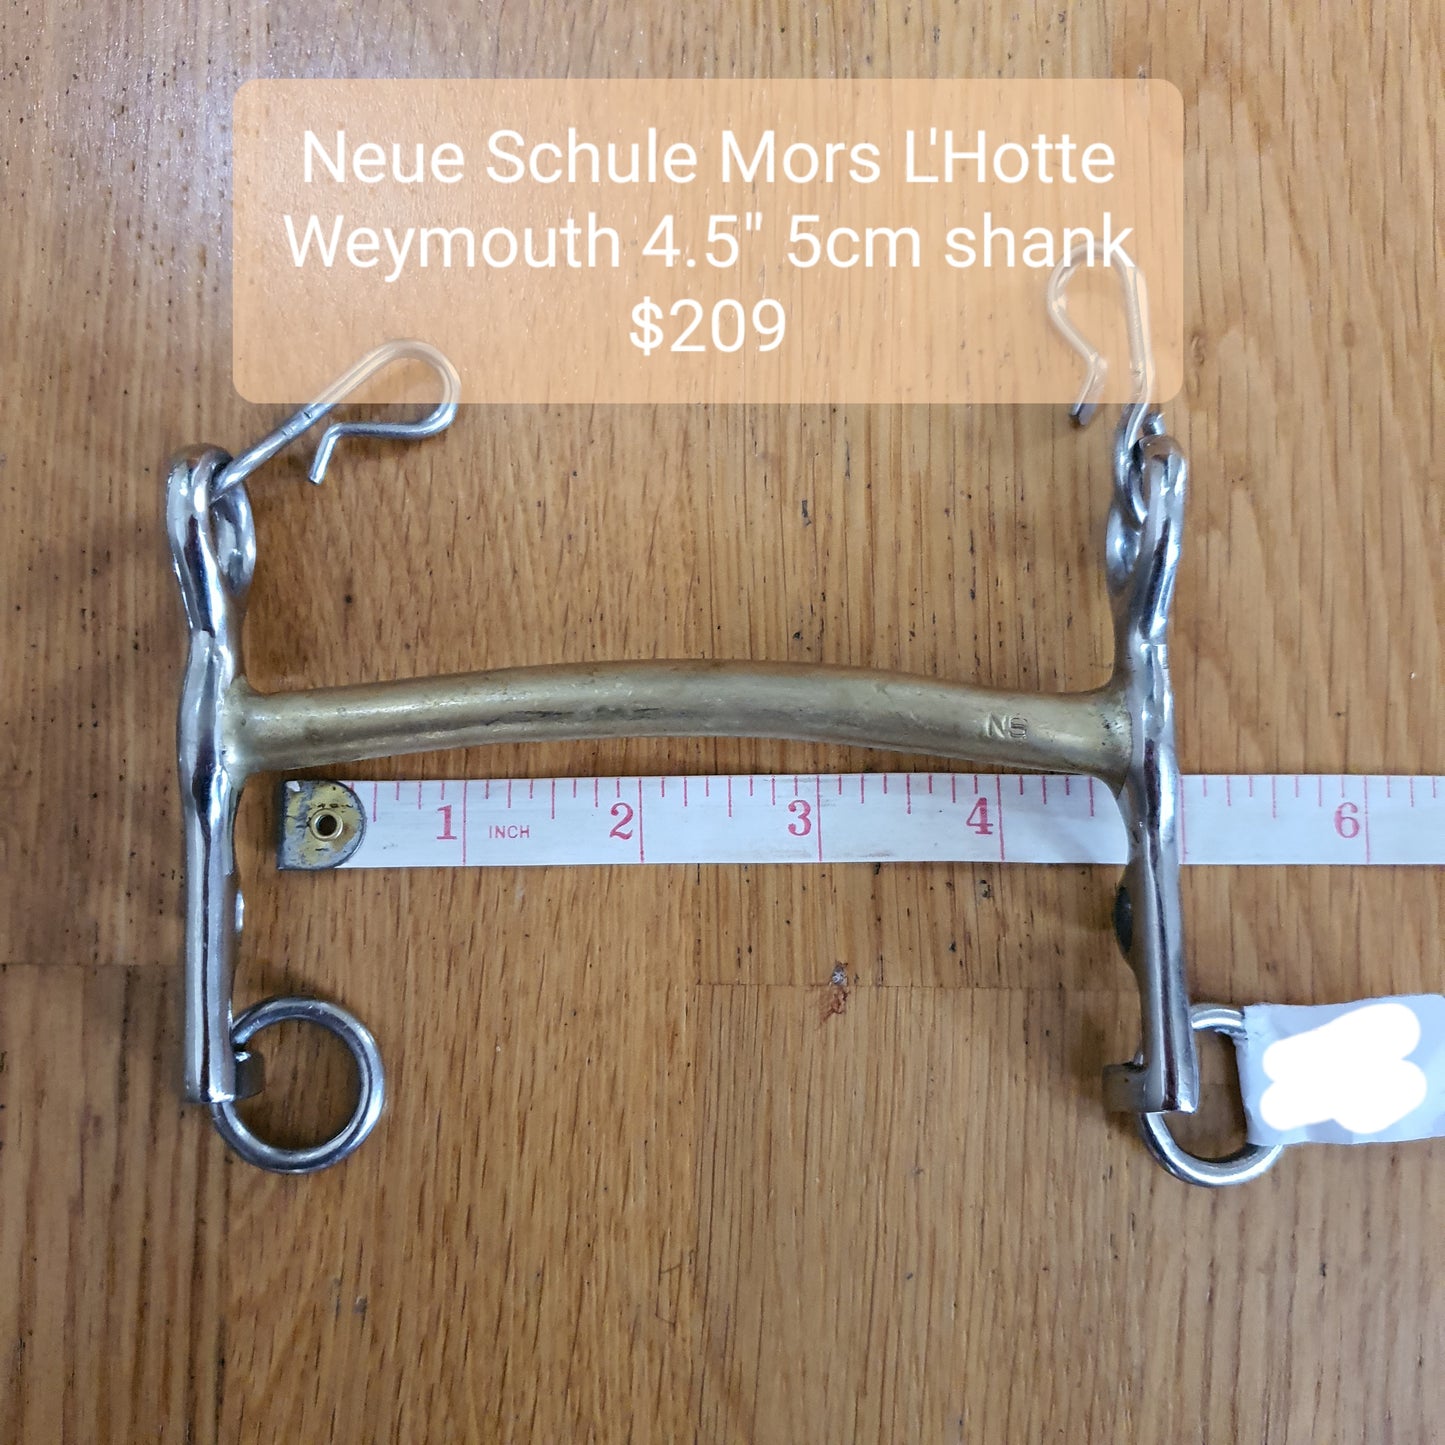 Neue Schule Mors L’Hotte Weymouth